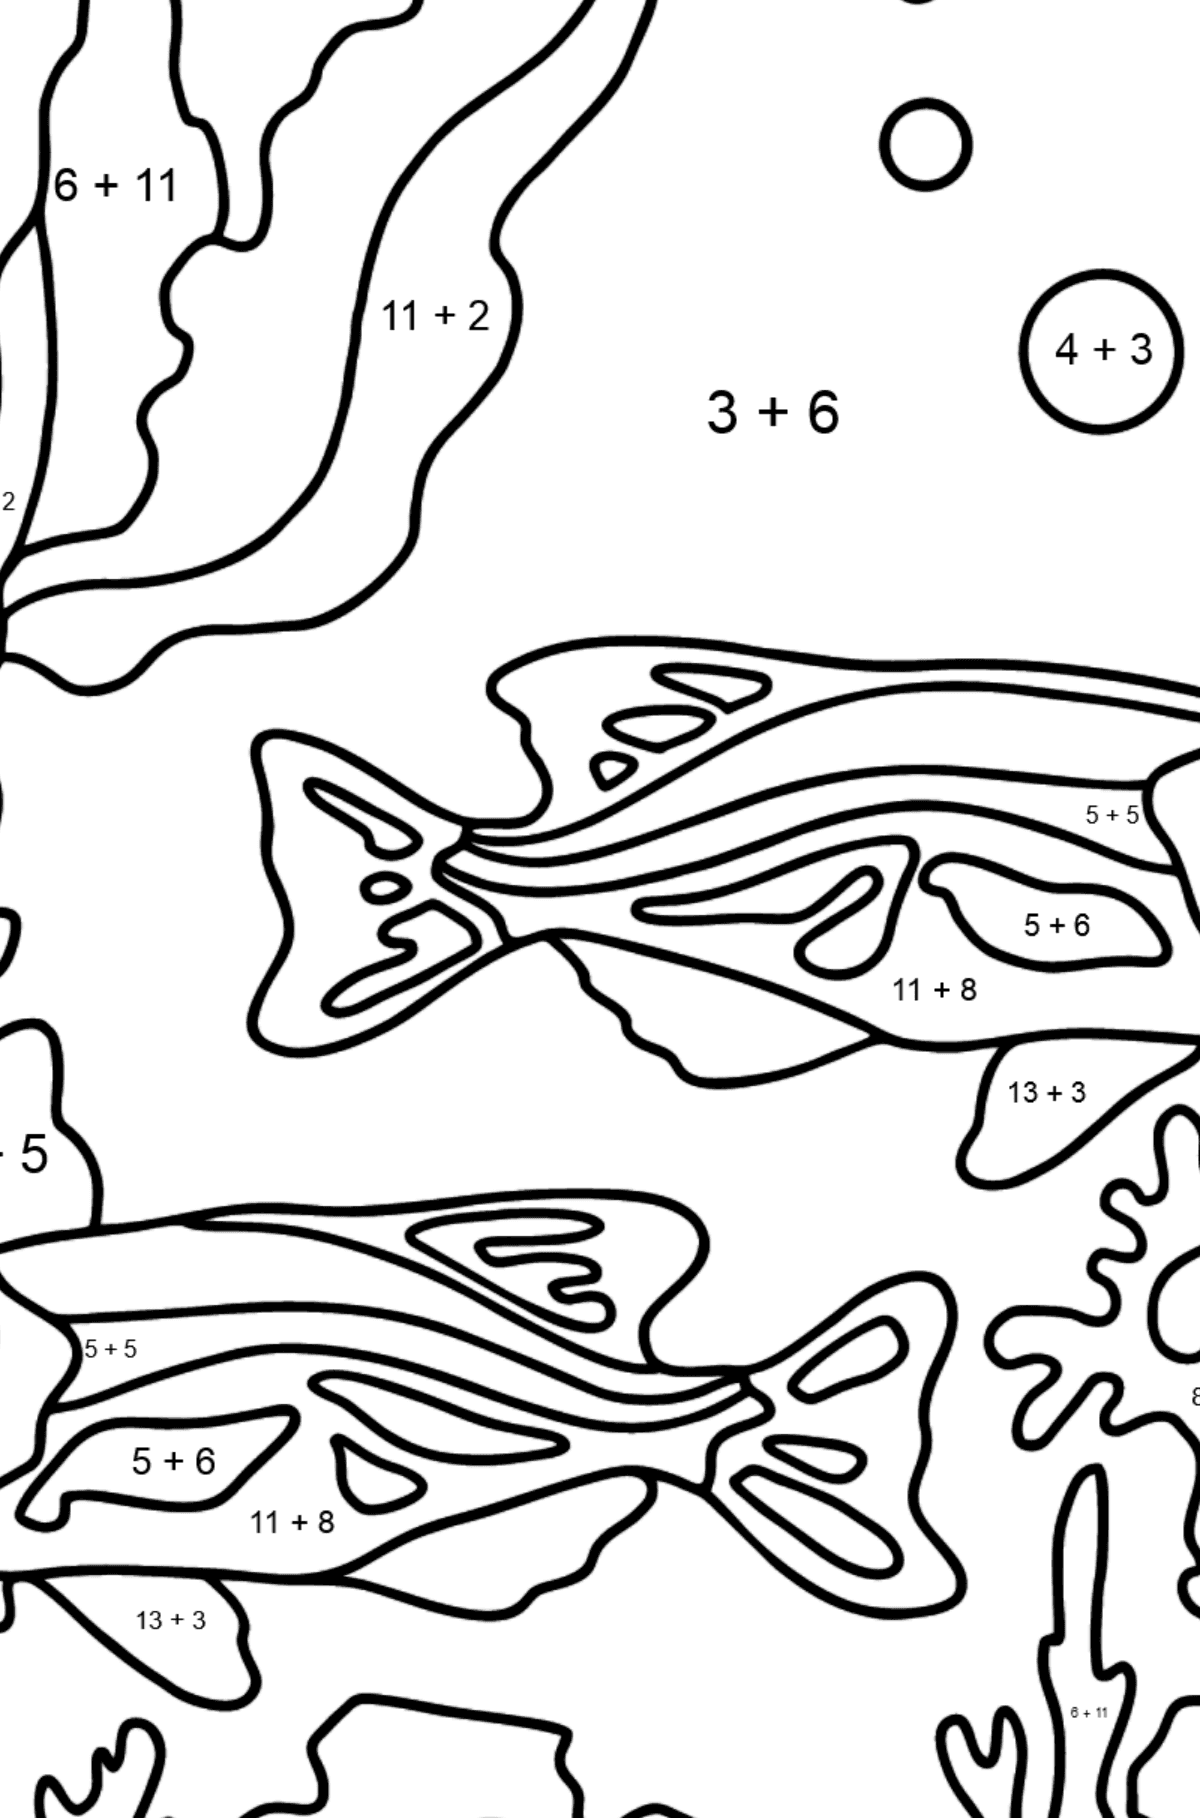 Coloring Page - Fish are Swimming Together Peacefully - Math Coloring - Addition for Kids